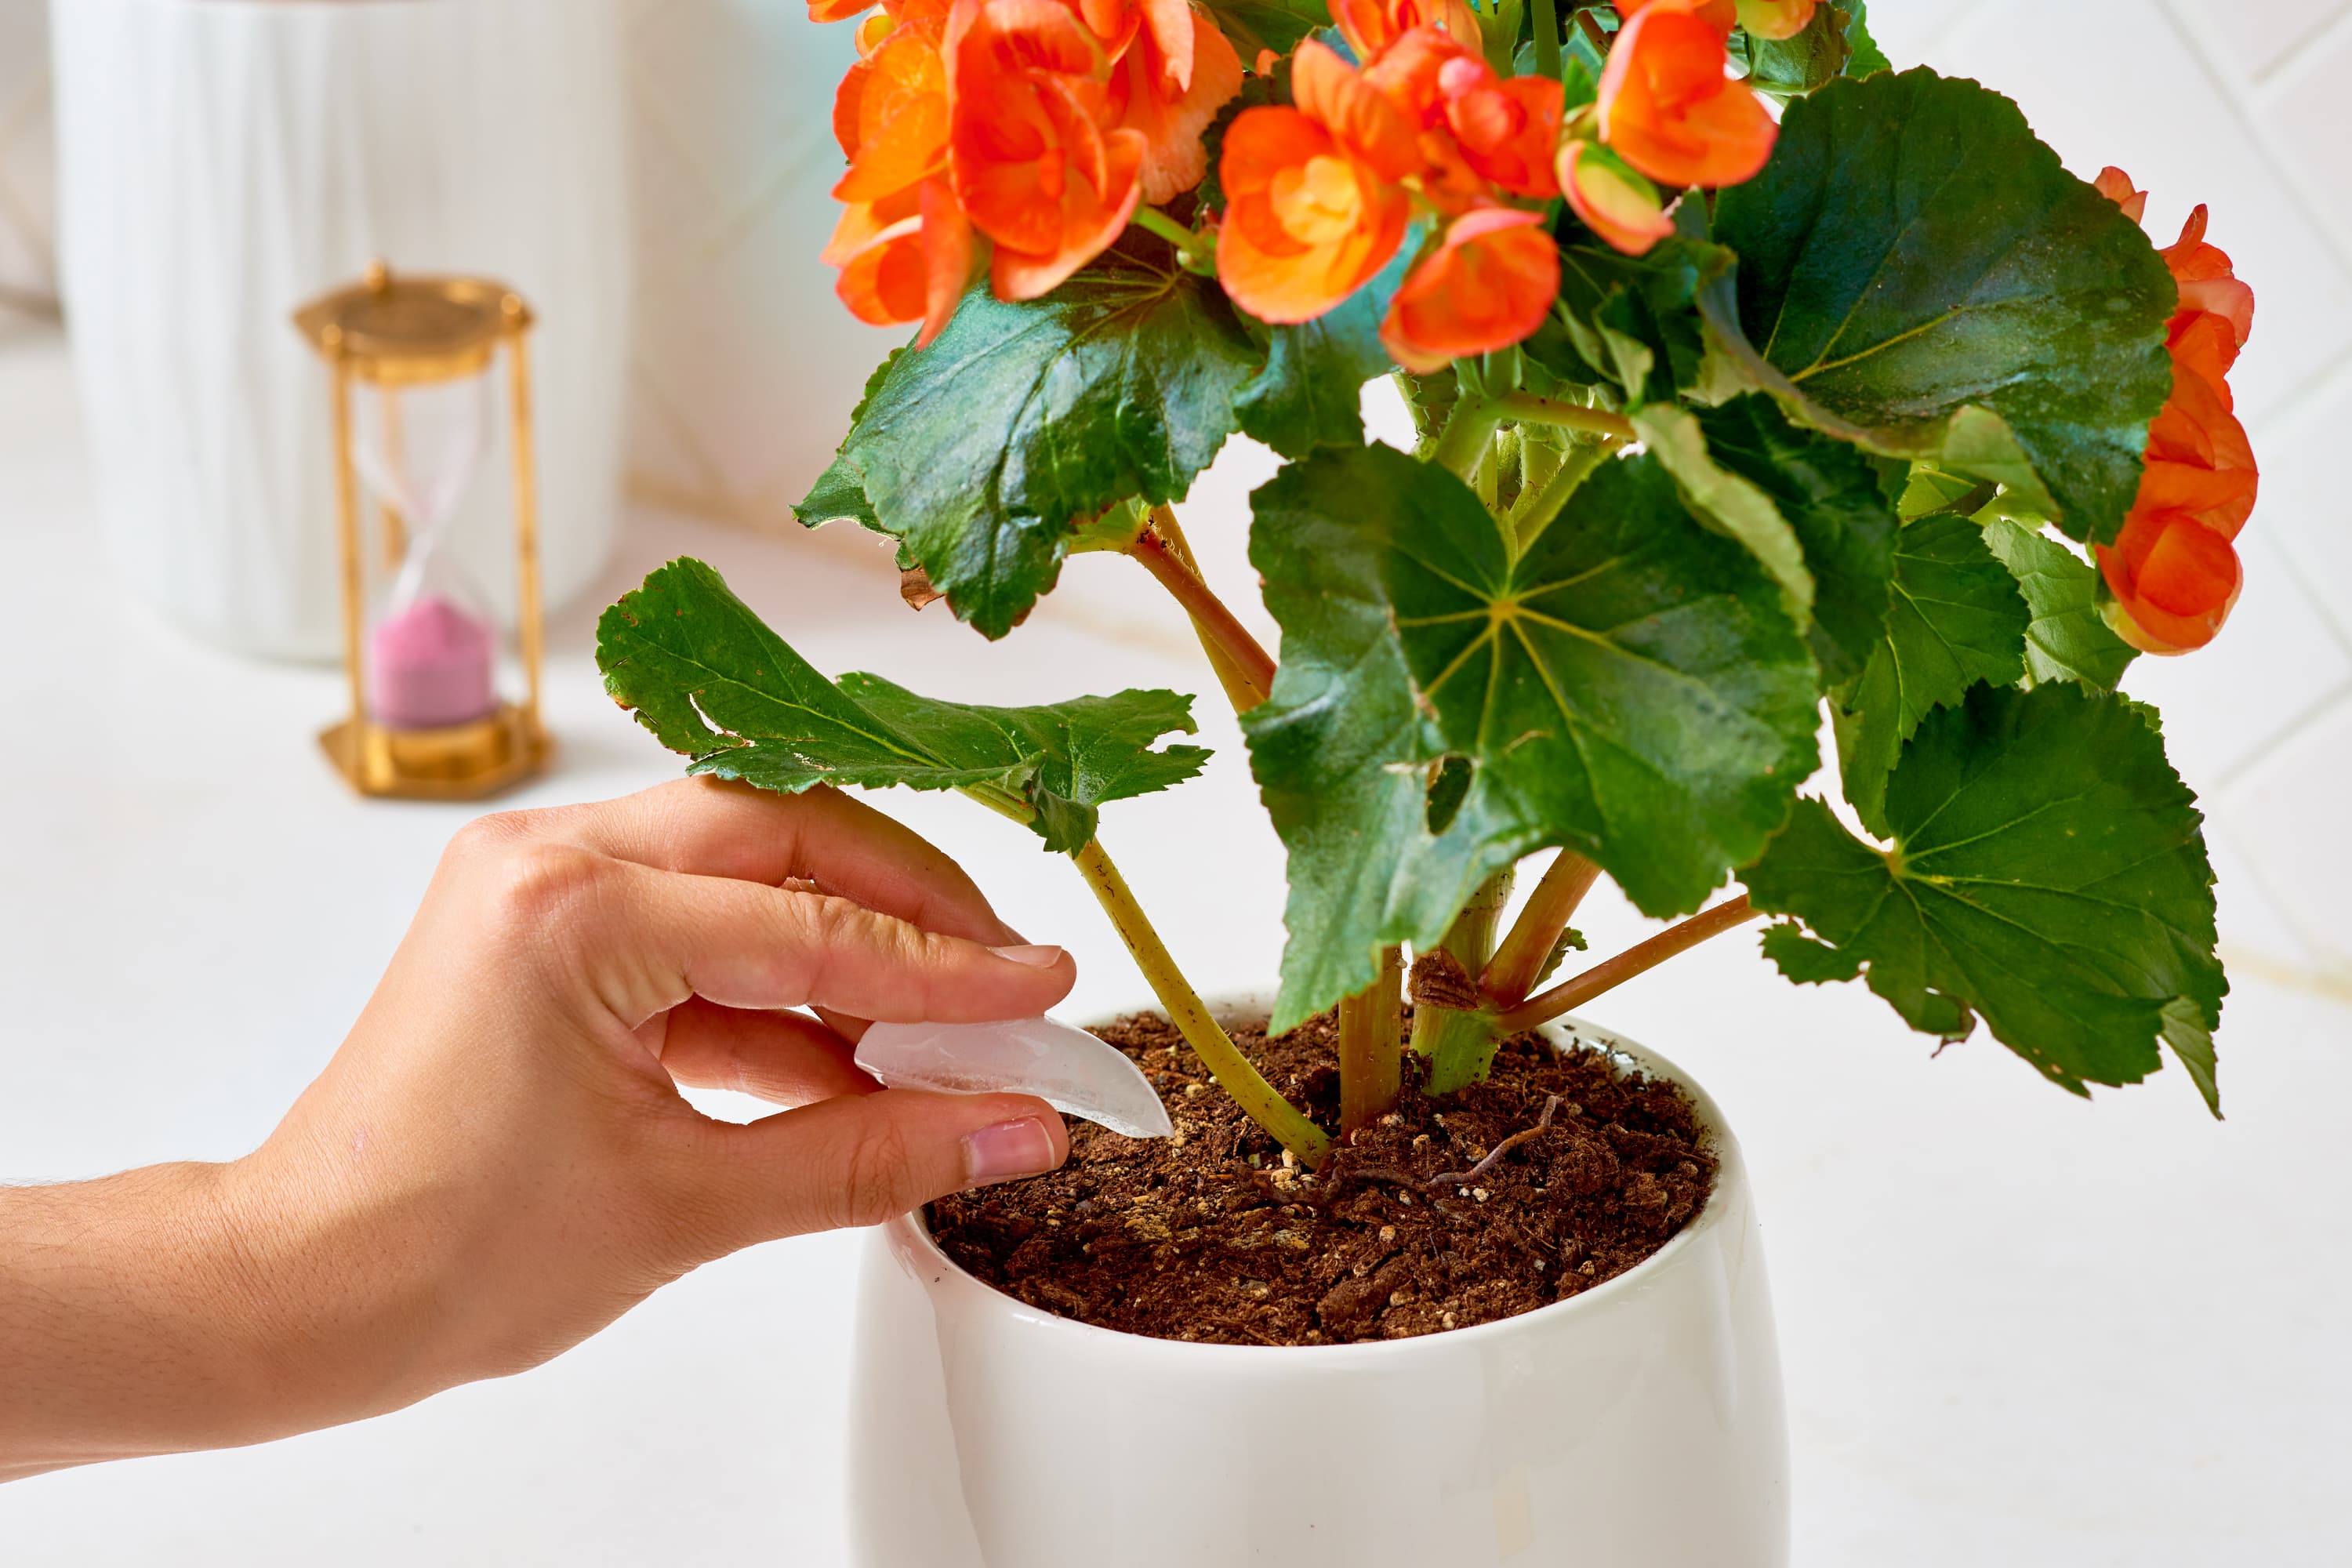 29 Gardening Hacks and Tips Anyone Can Use